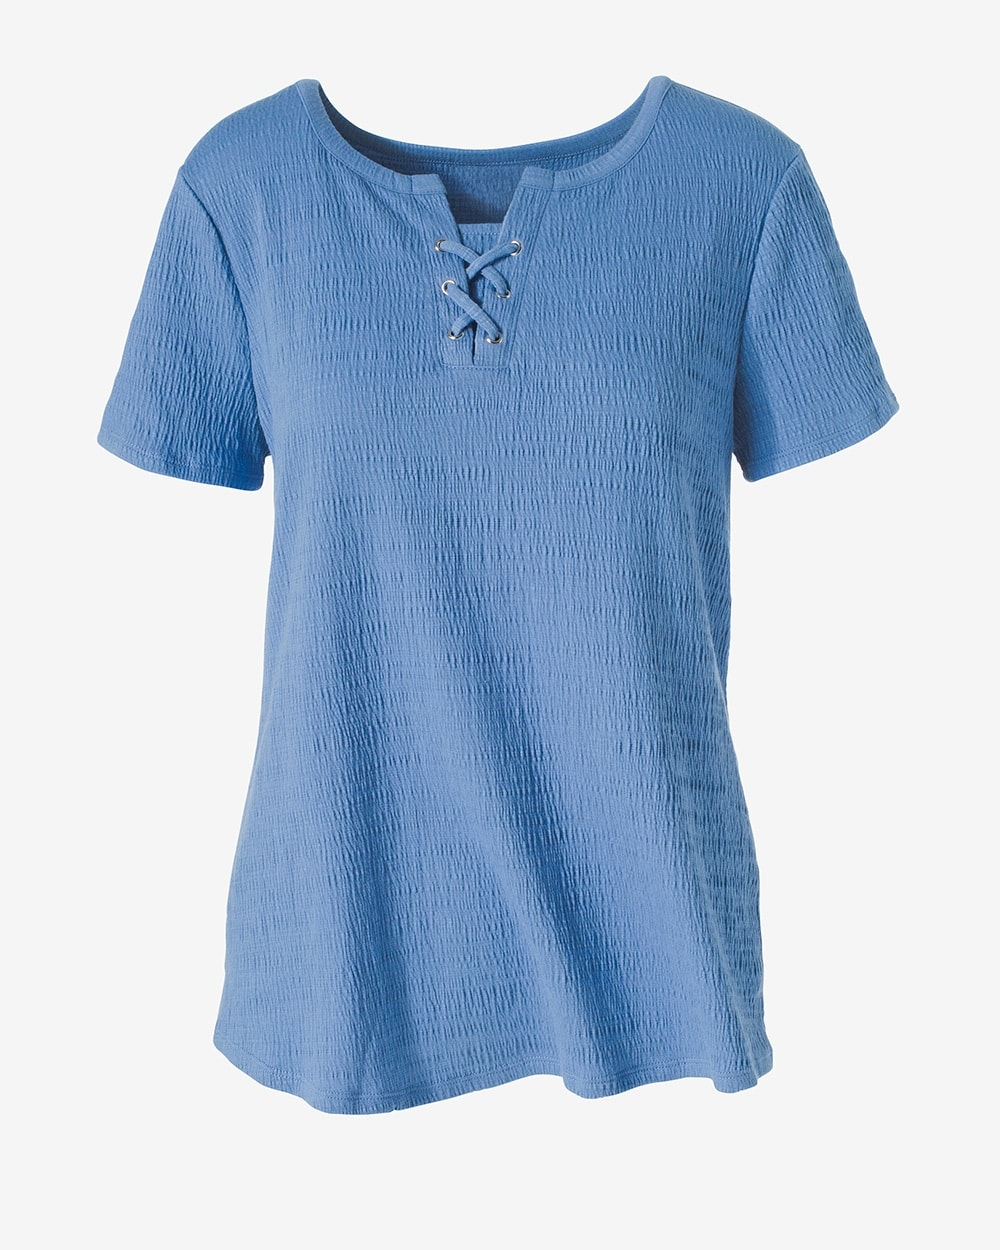 Lace-Up Textured Tee